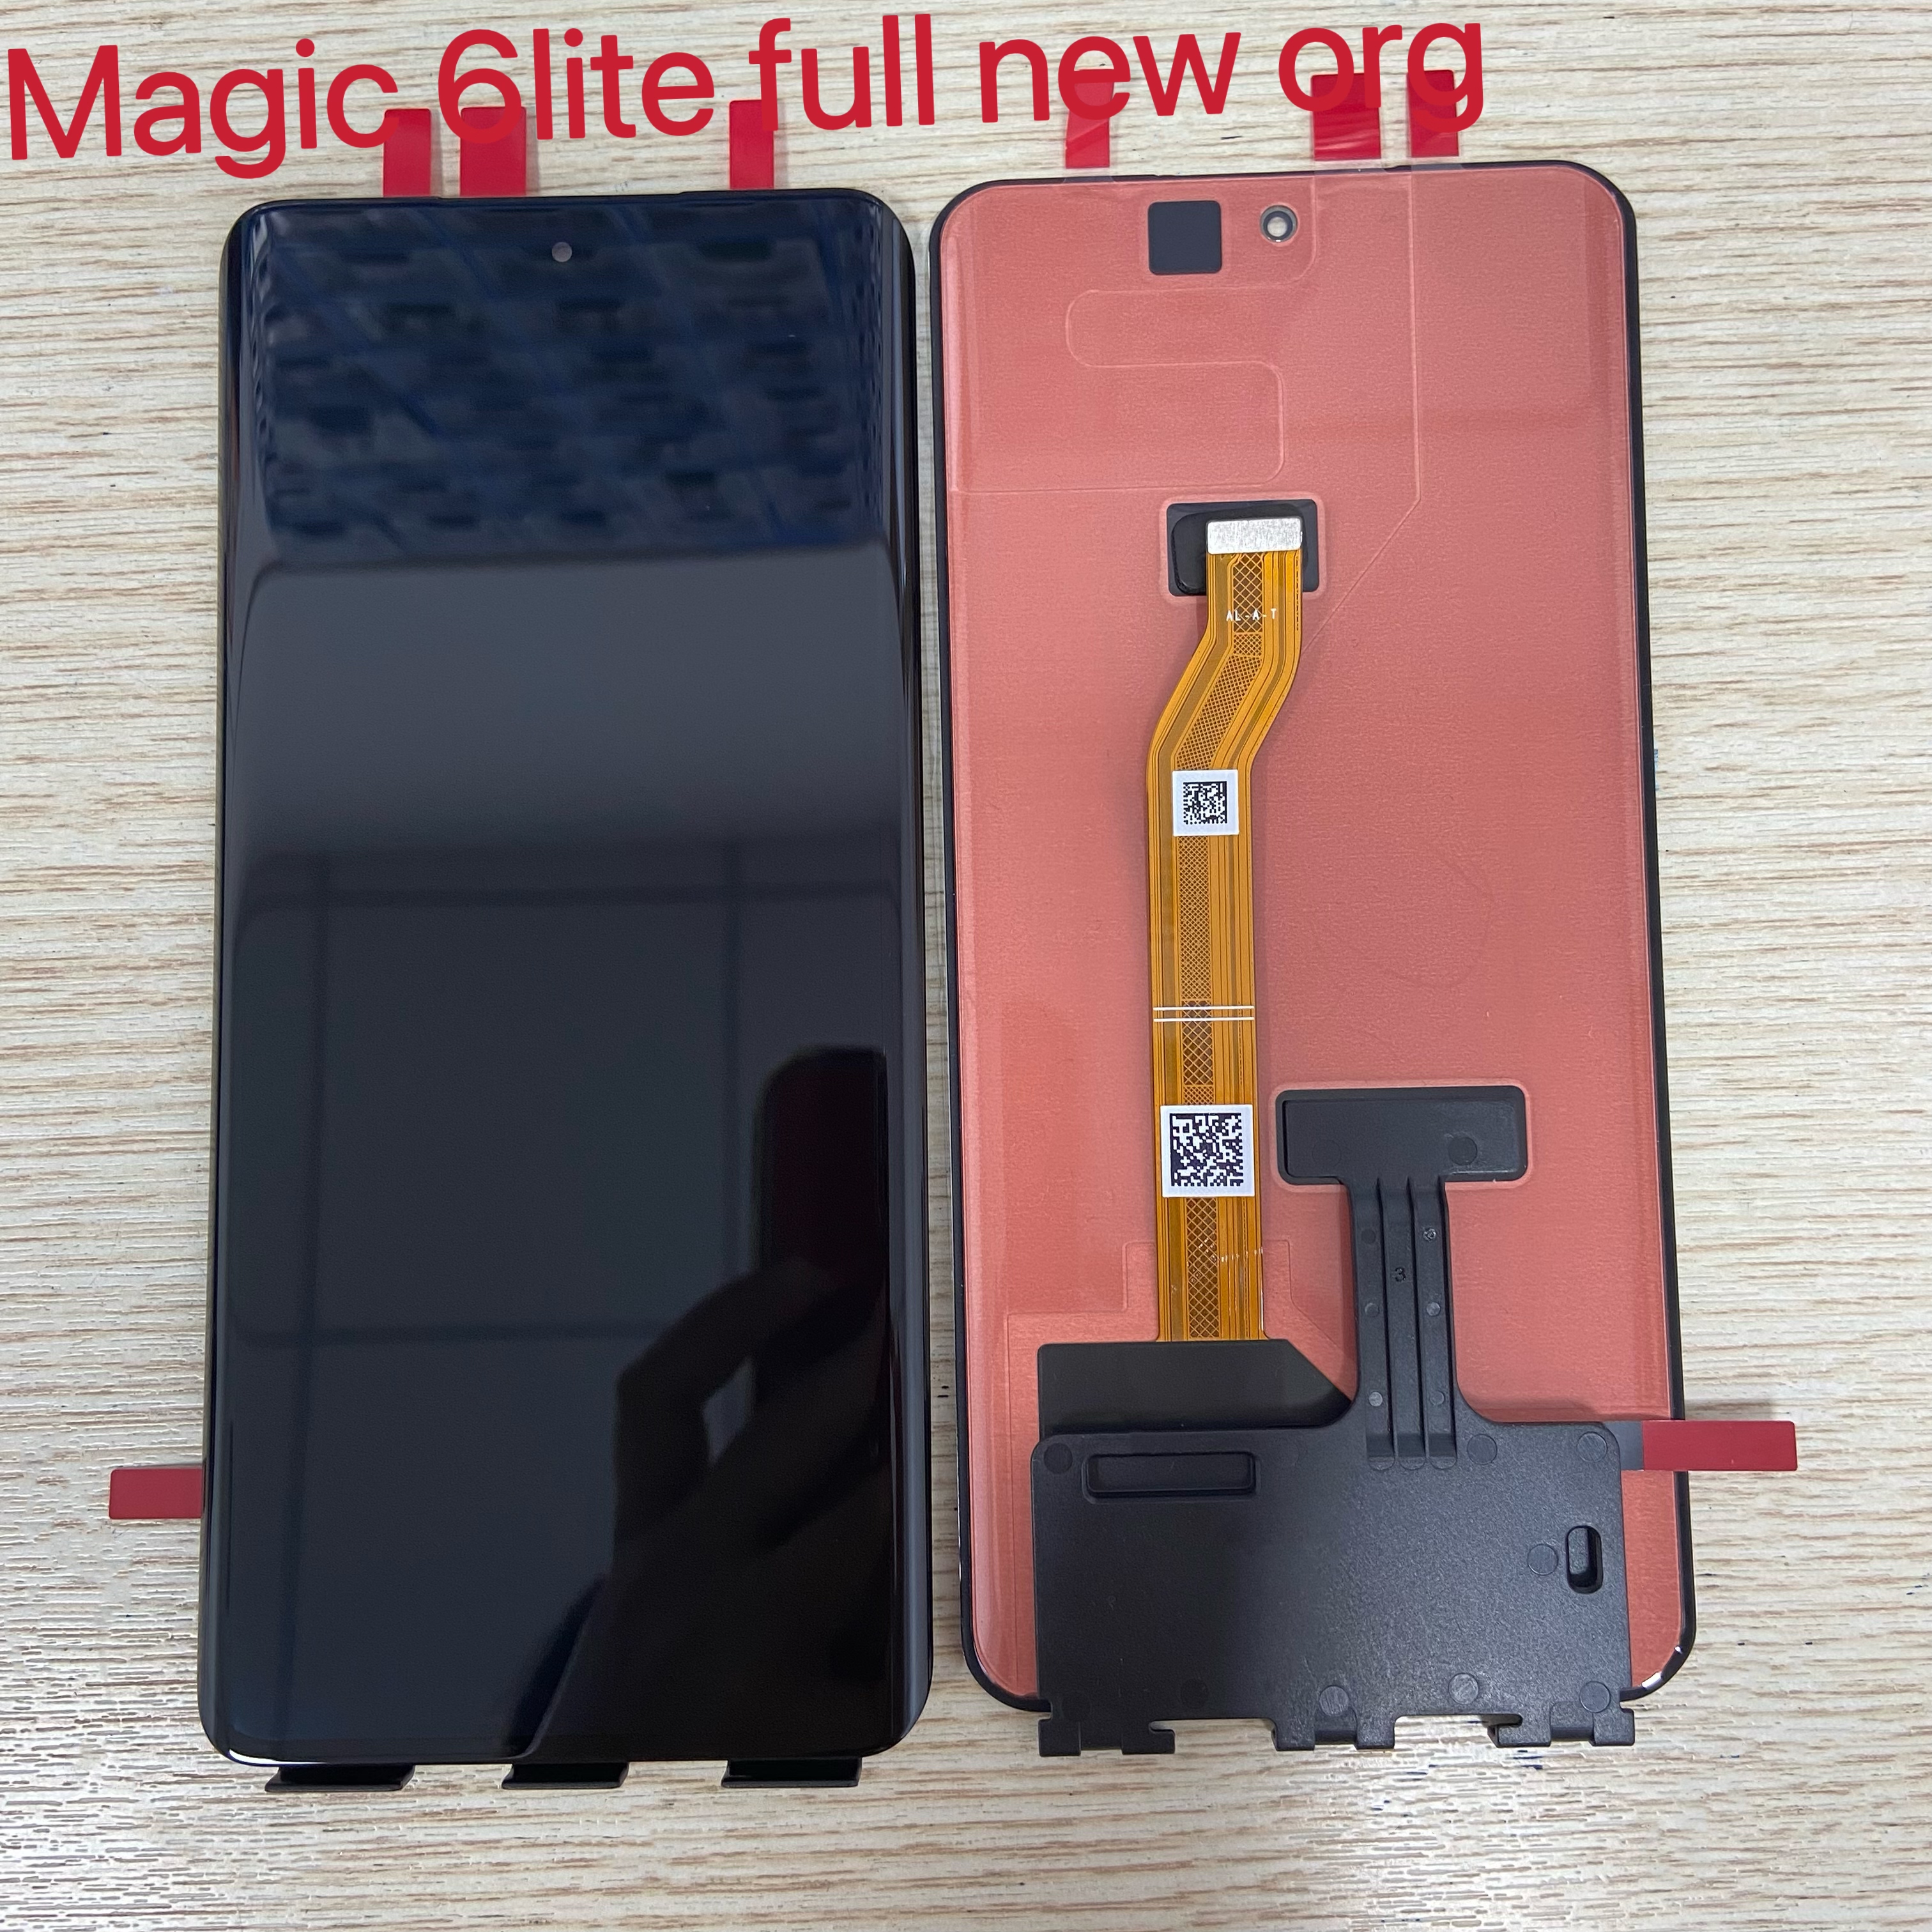 For Huawei Magic 6 lite full new org Lcd Screen display and Lcd Screen replacement